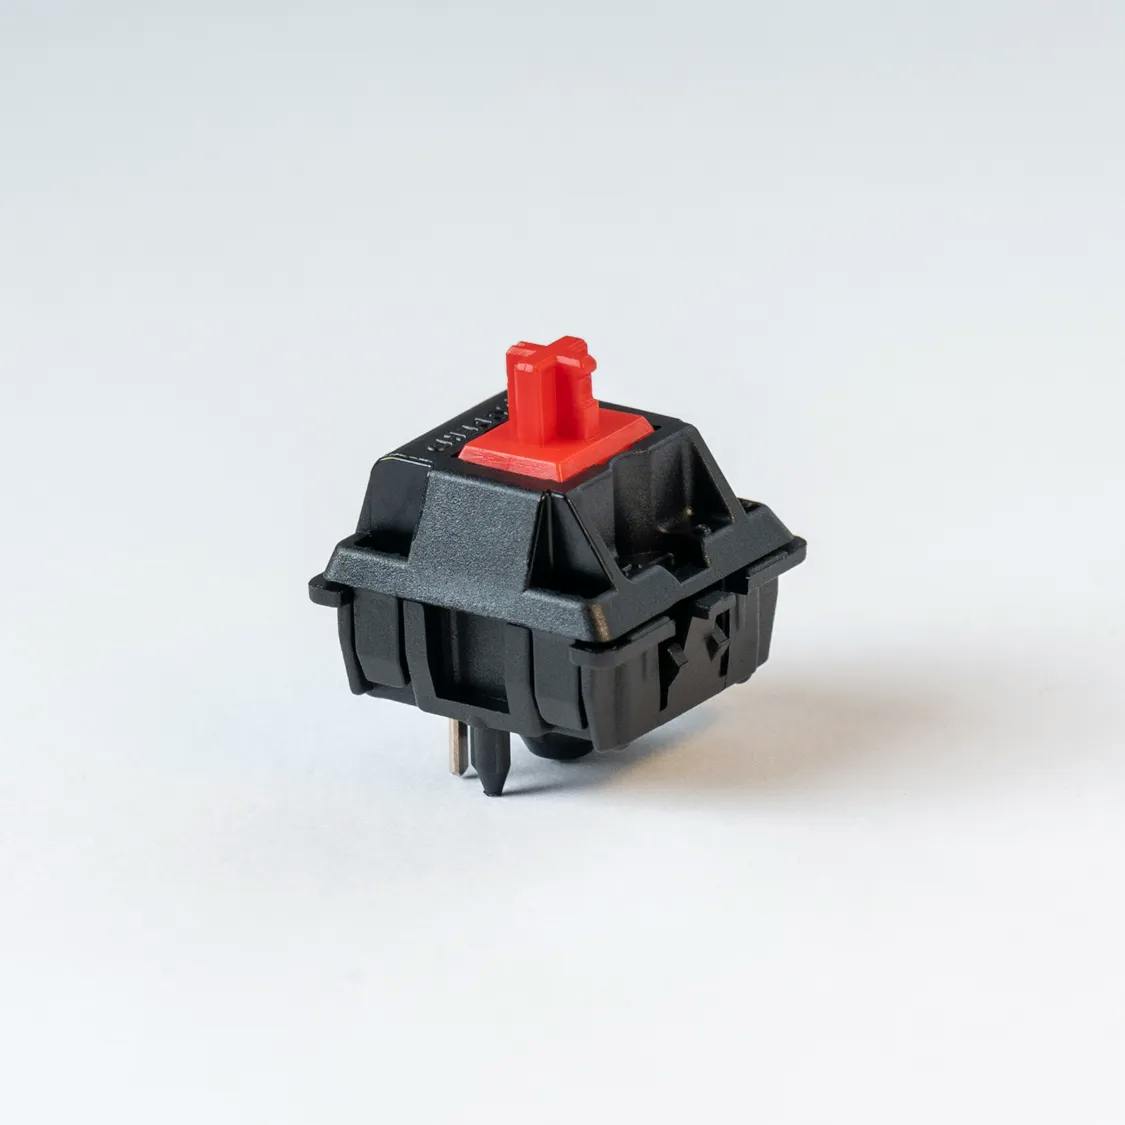 Image for Cherry MX Red Hyperglide Linear Switch